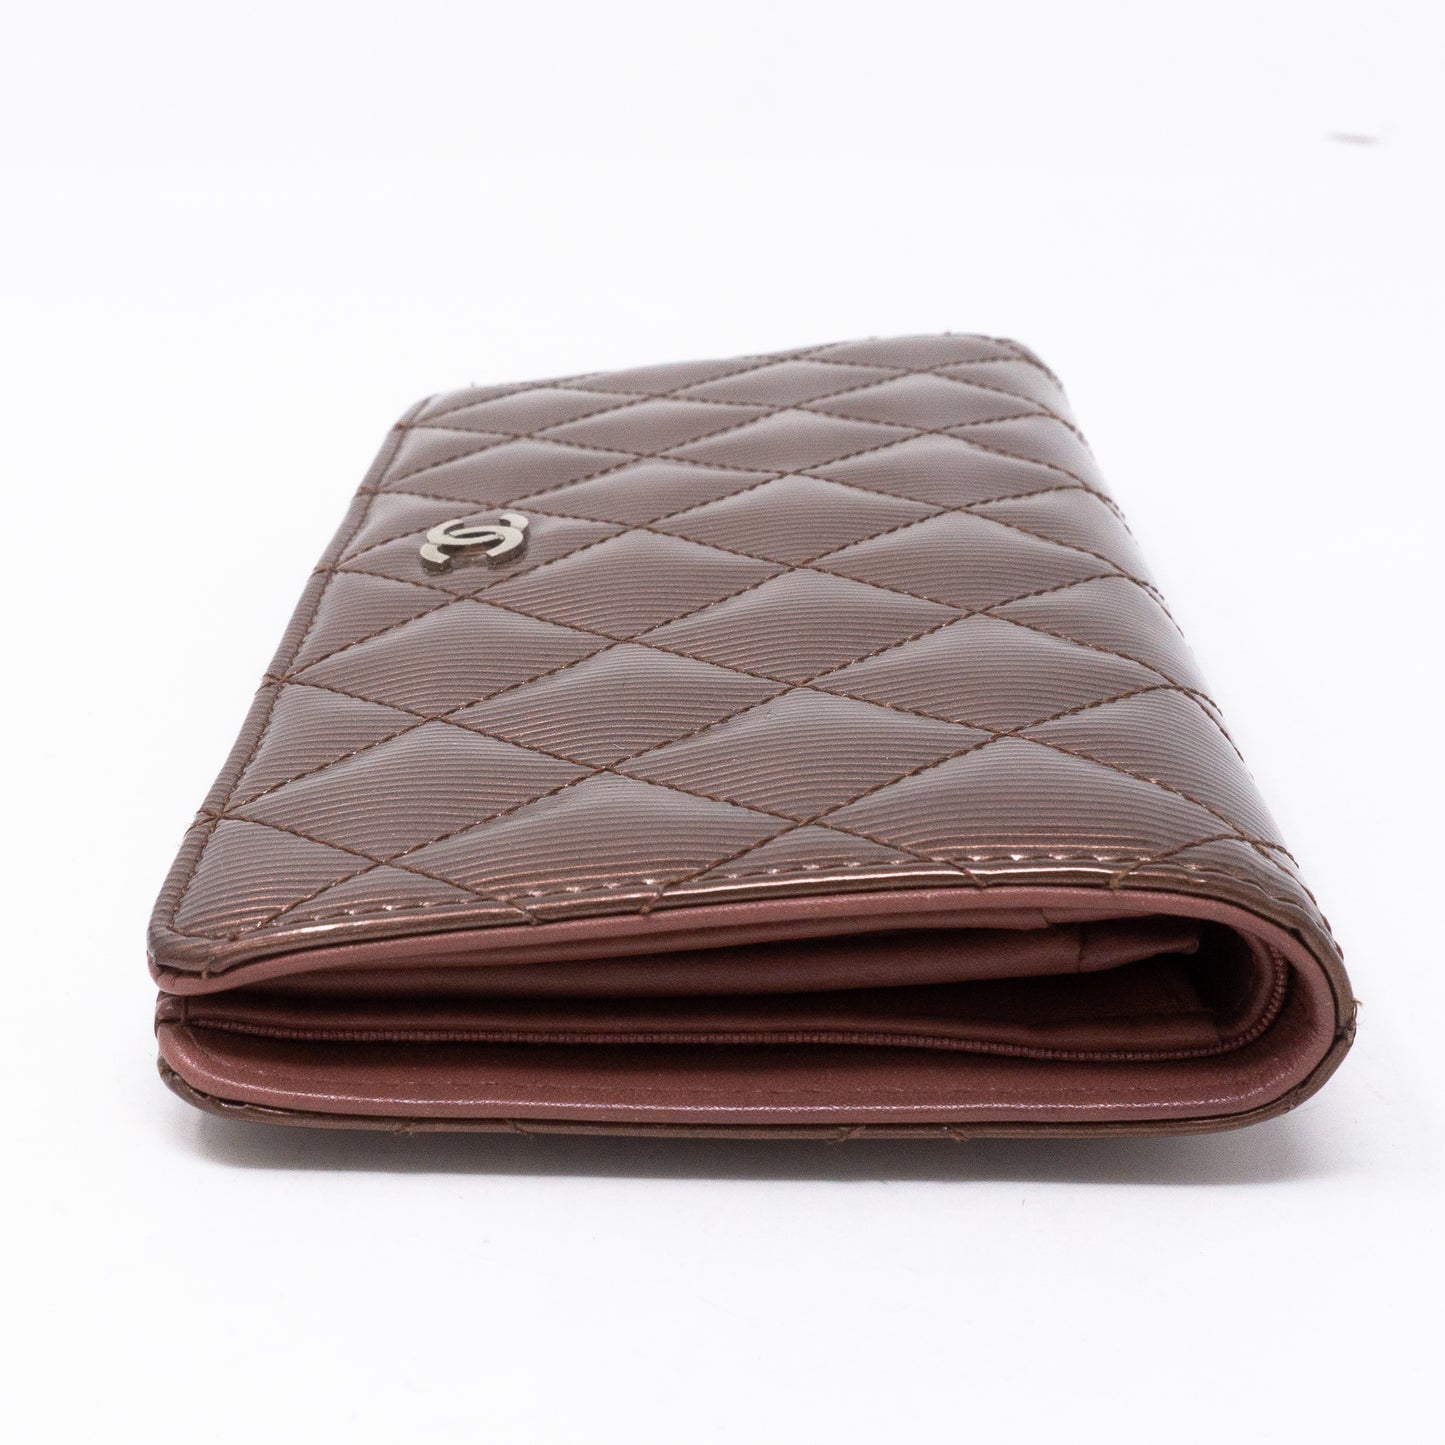 Classic Long Wallet Striped Patent Leather